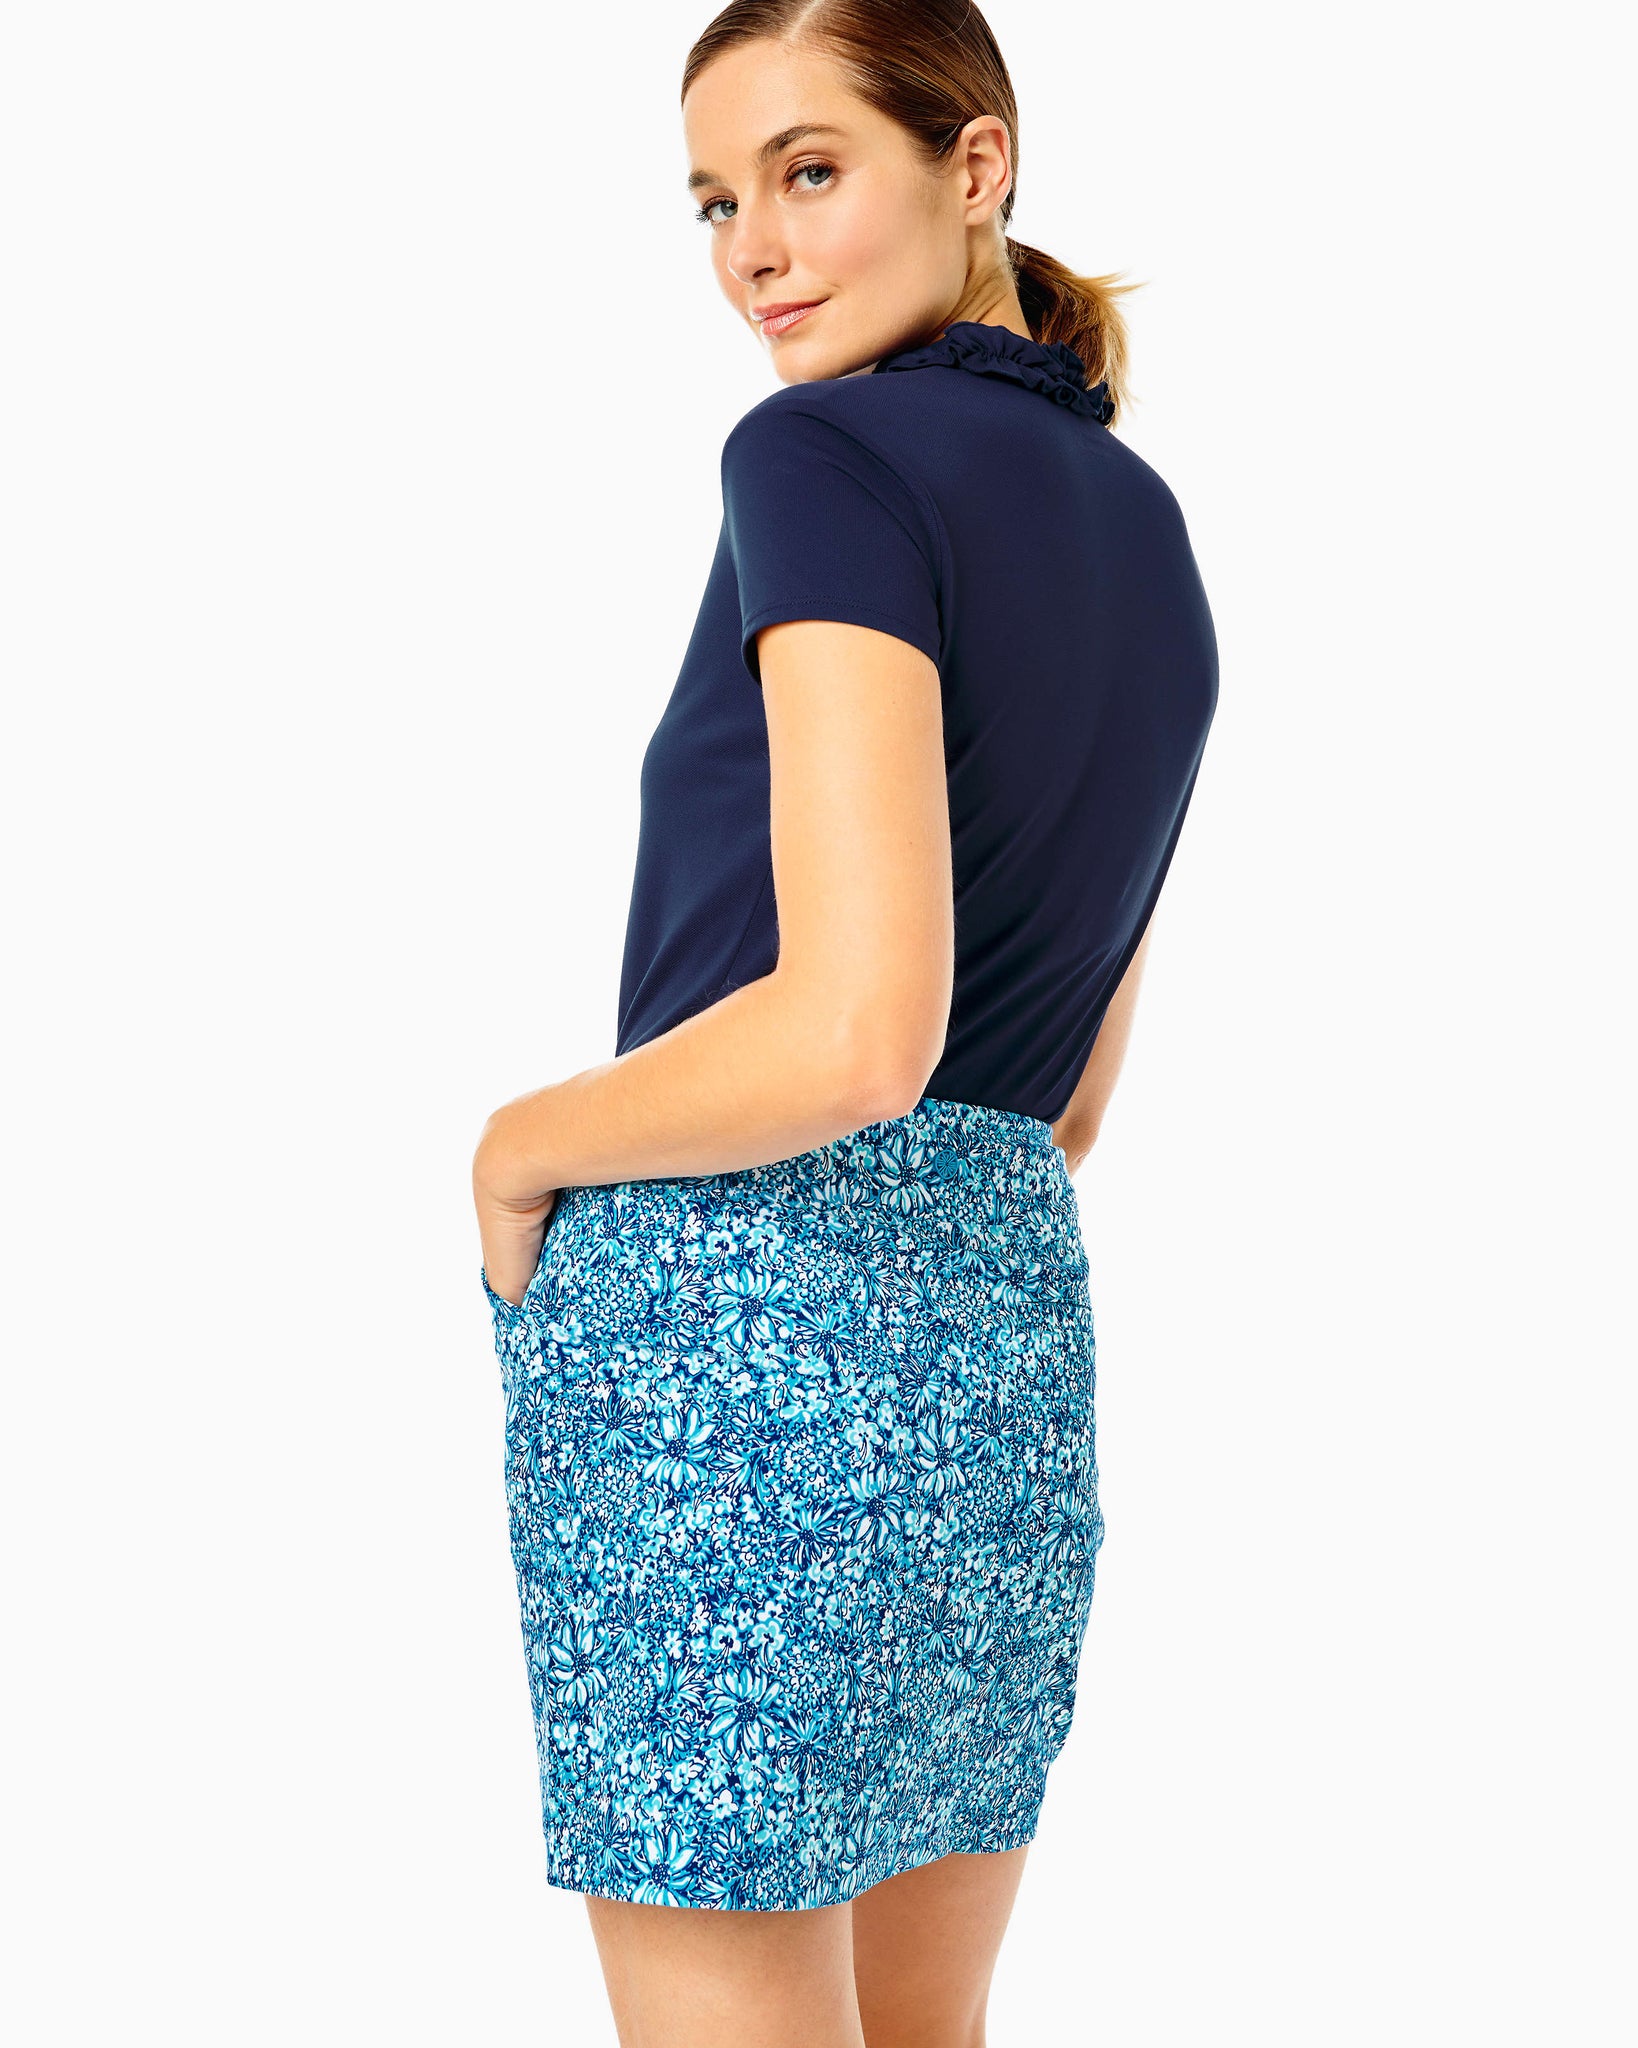 UPF 50+ Luxletic Monica Skort The - - Pulitzer Golf Blooming Islands Signature A Store – Cumulus Lilly Together Blue